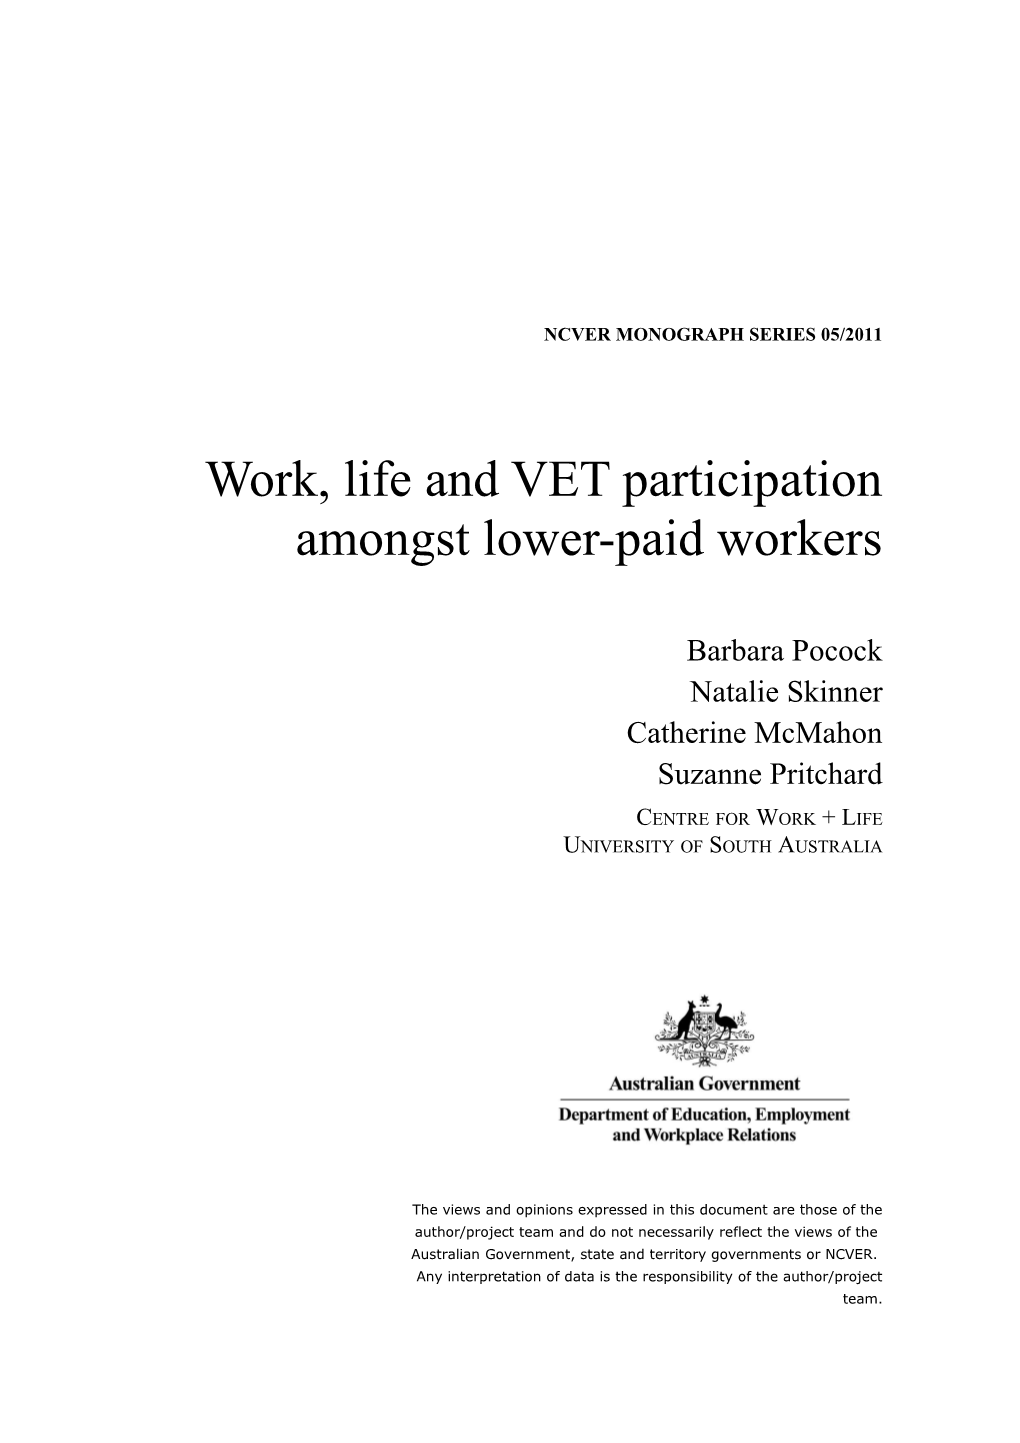 Work, Life and VET Participation Amongst Lower-Paid Workers